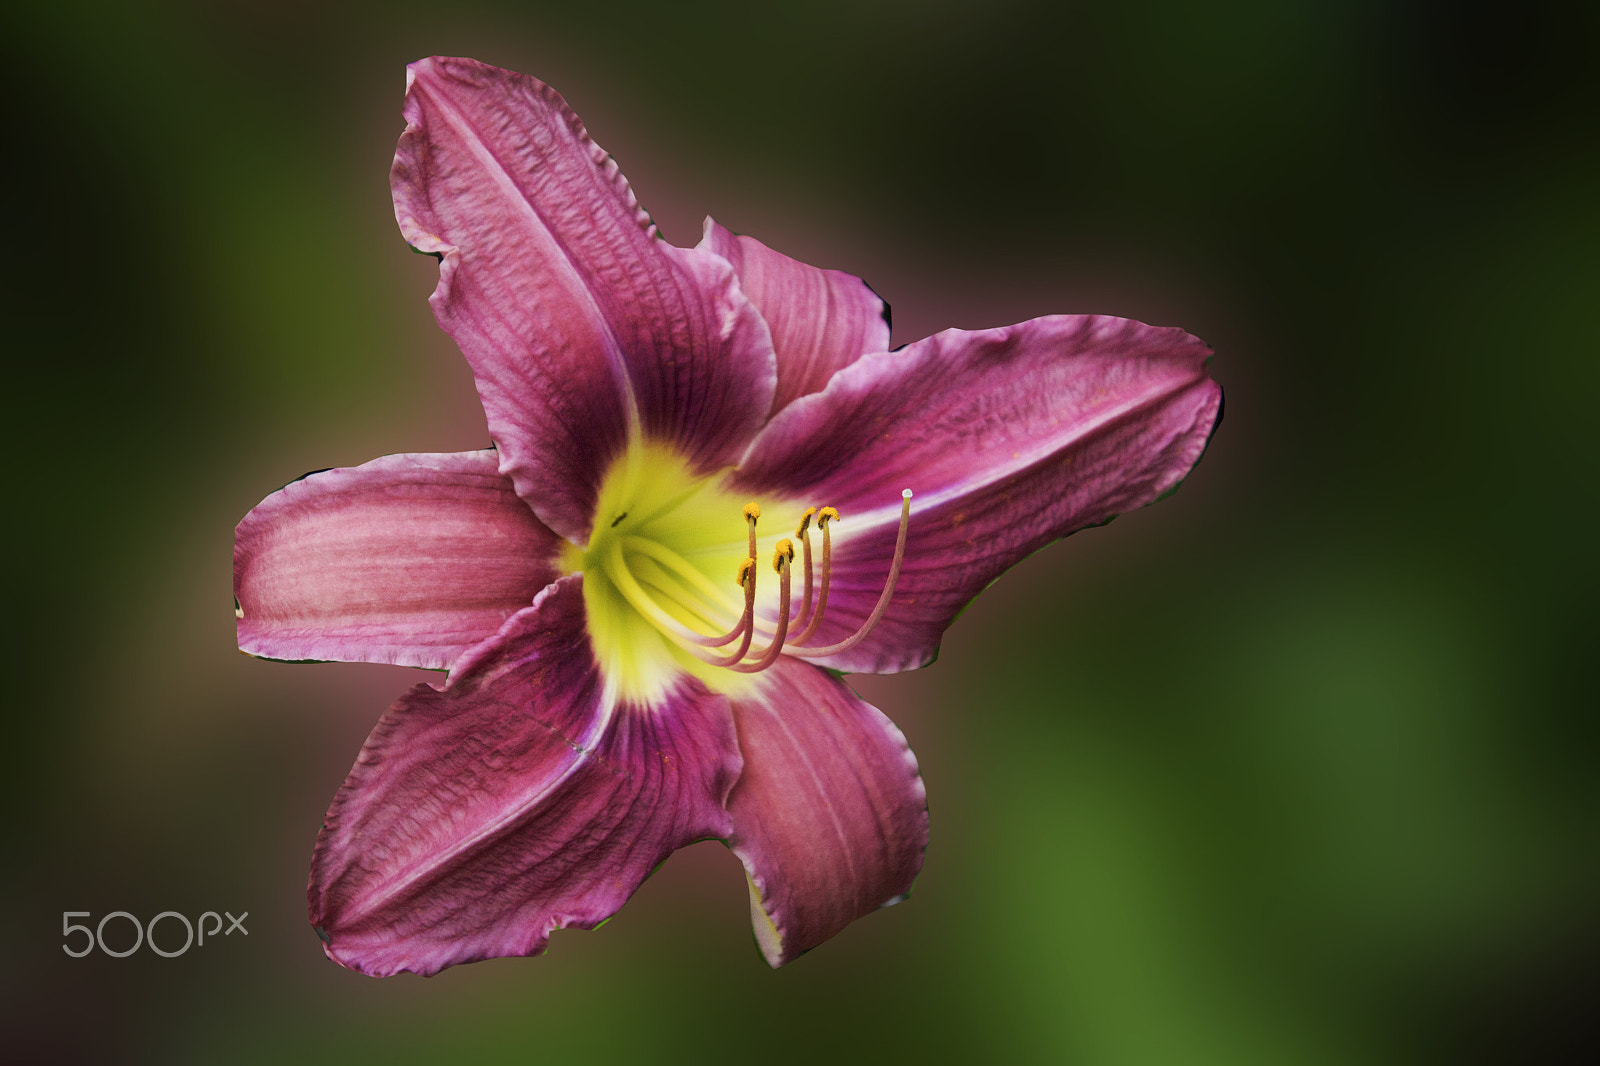 Nikon 1 J4 sample photo. Day lilly on a green background photography